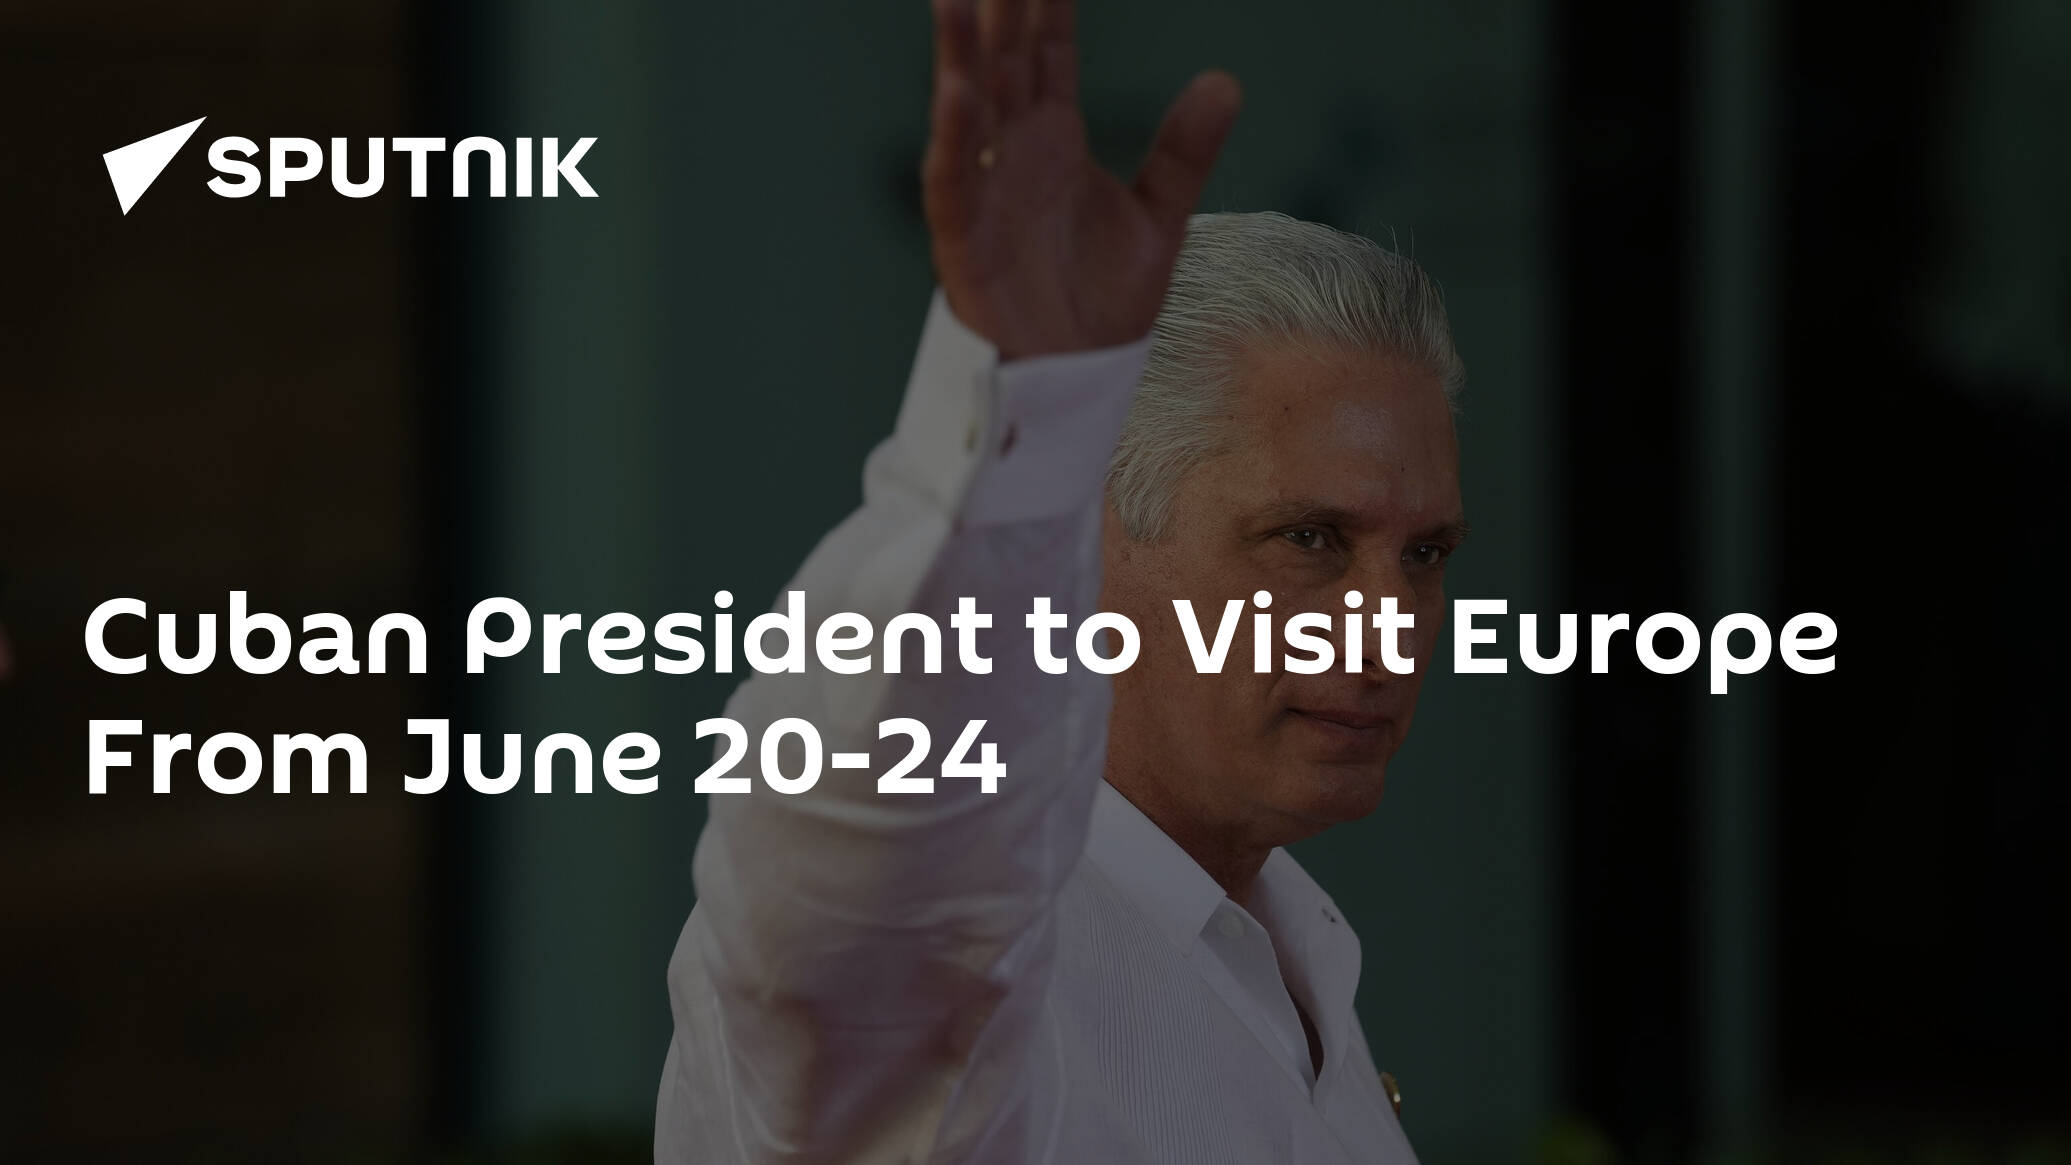 Cuban President to Visit Europe From June 20-24